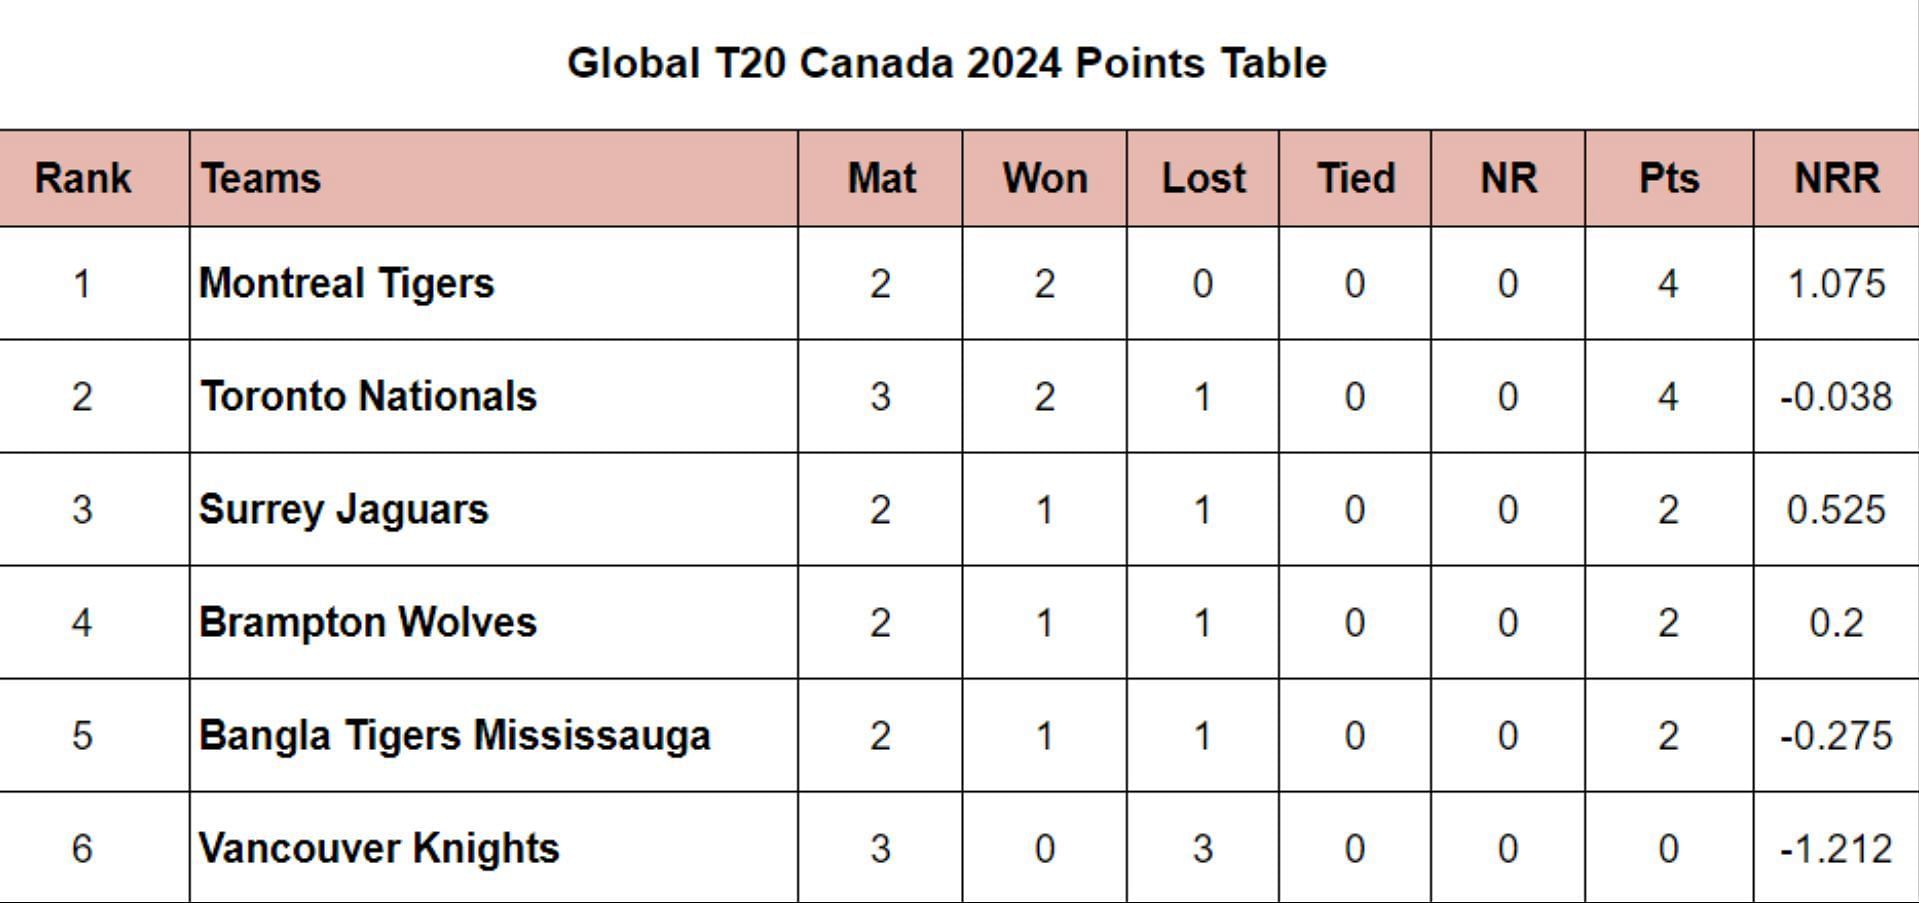 Global T20 Canada 2024 Points Table: Updated Standings after Toronto Nationals vs Surrey Jaguars, Match 7